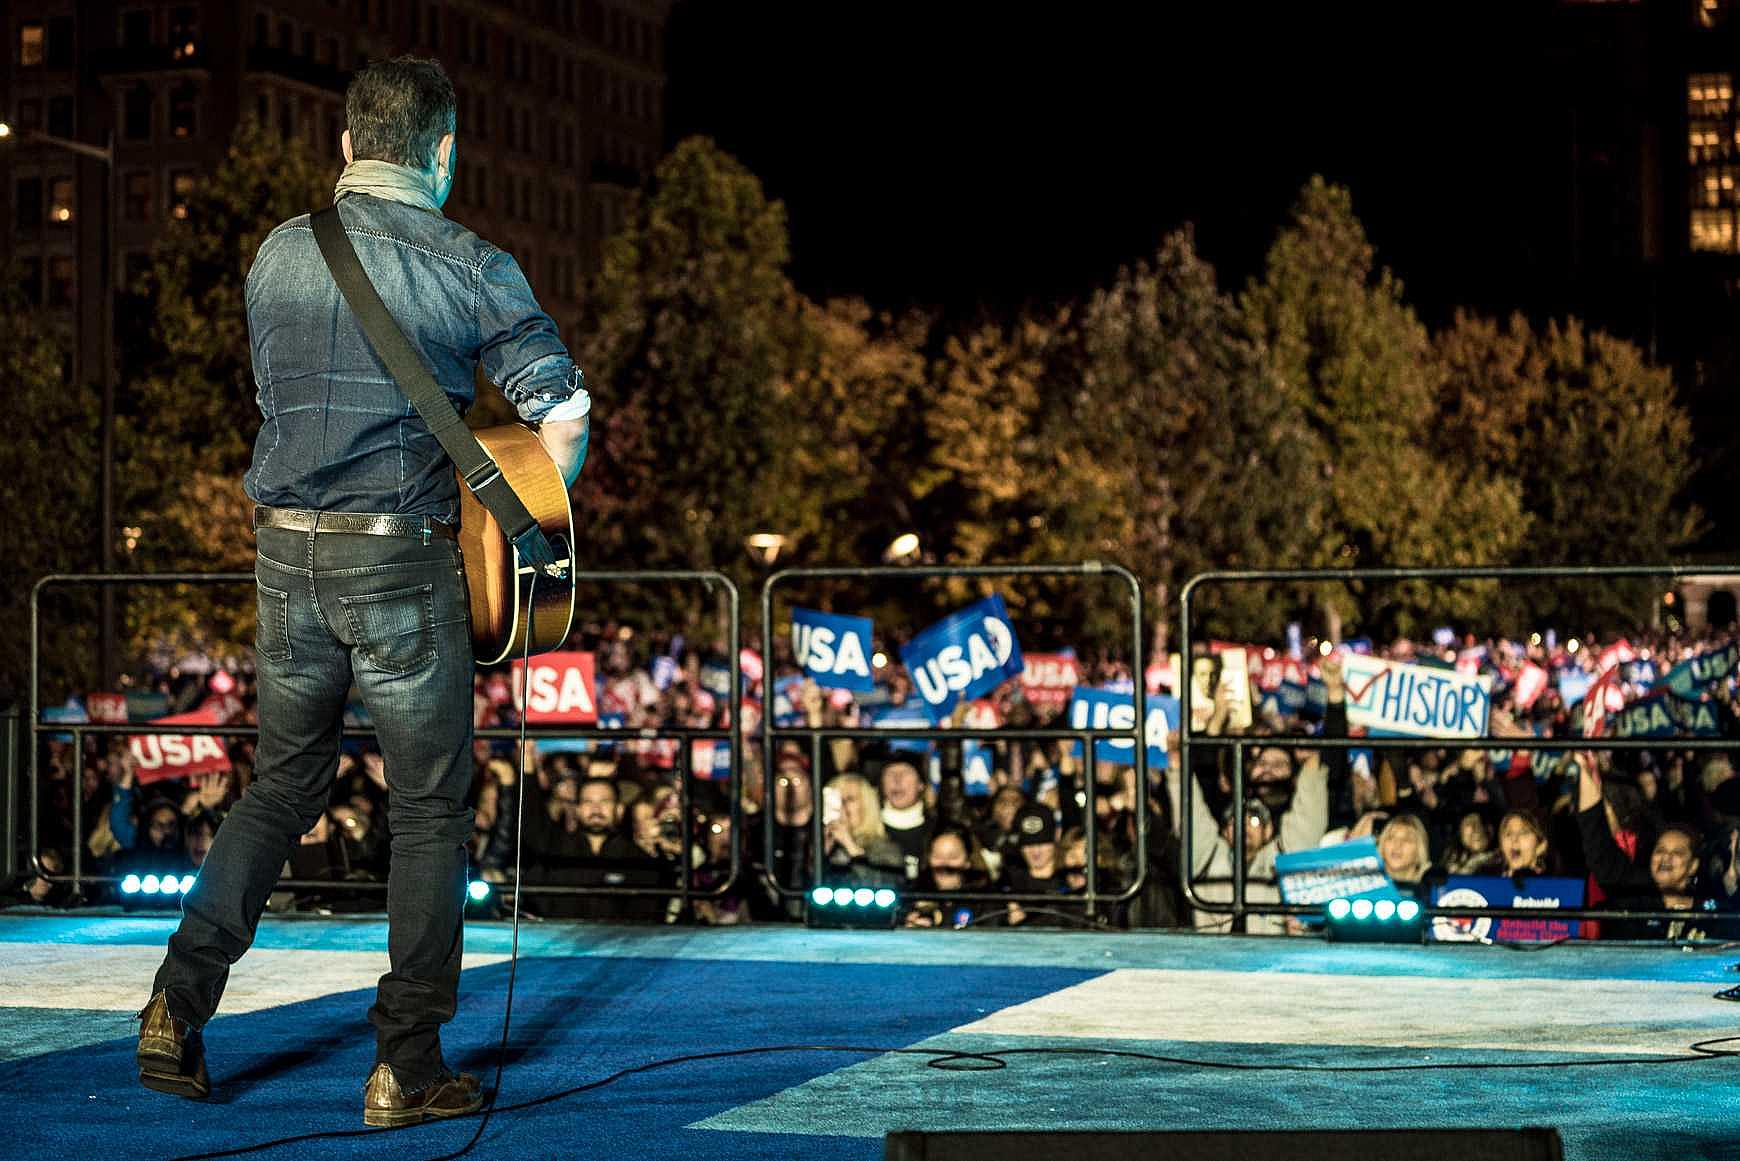 Bruce Springsteen faces crowd on Independence Mall